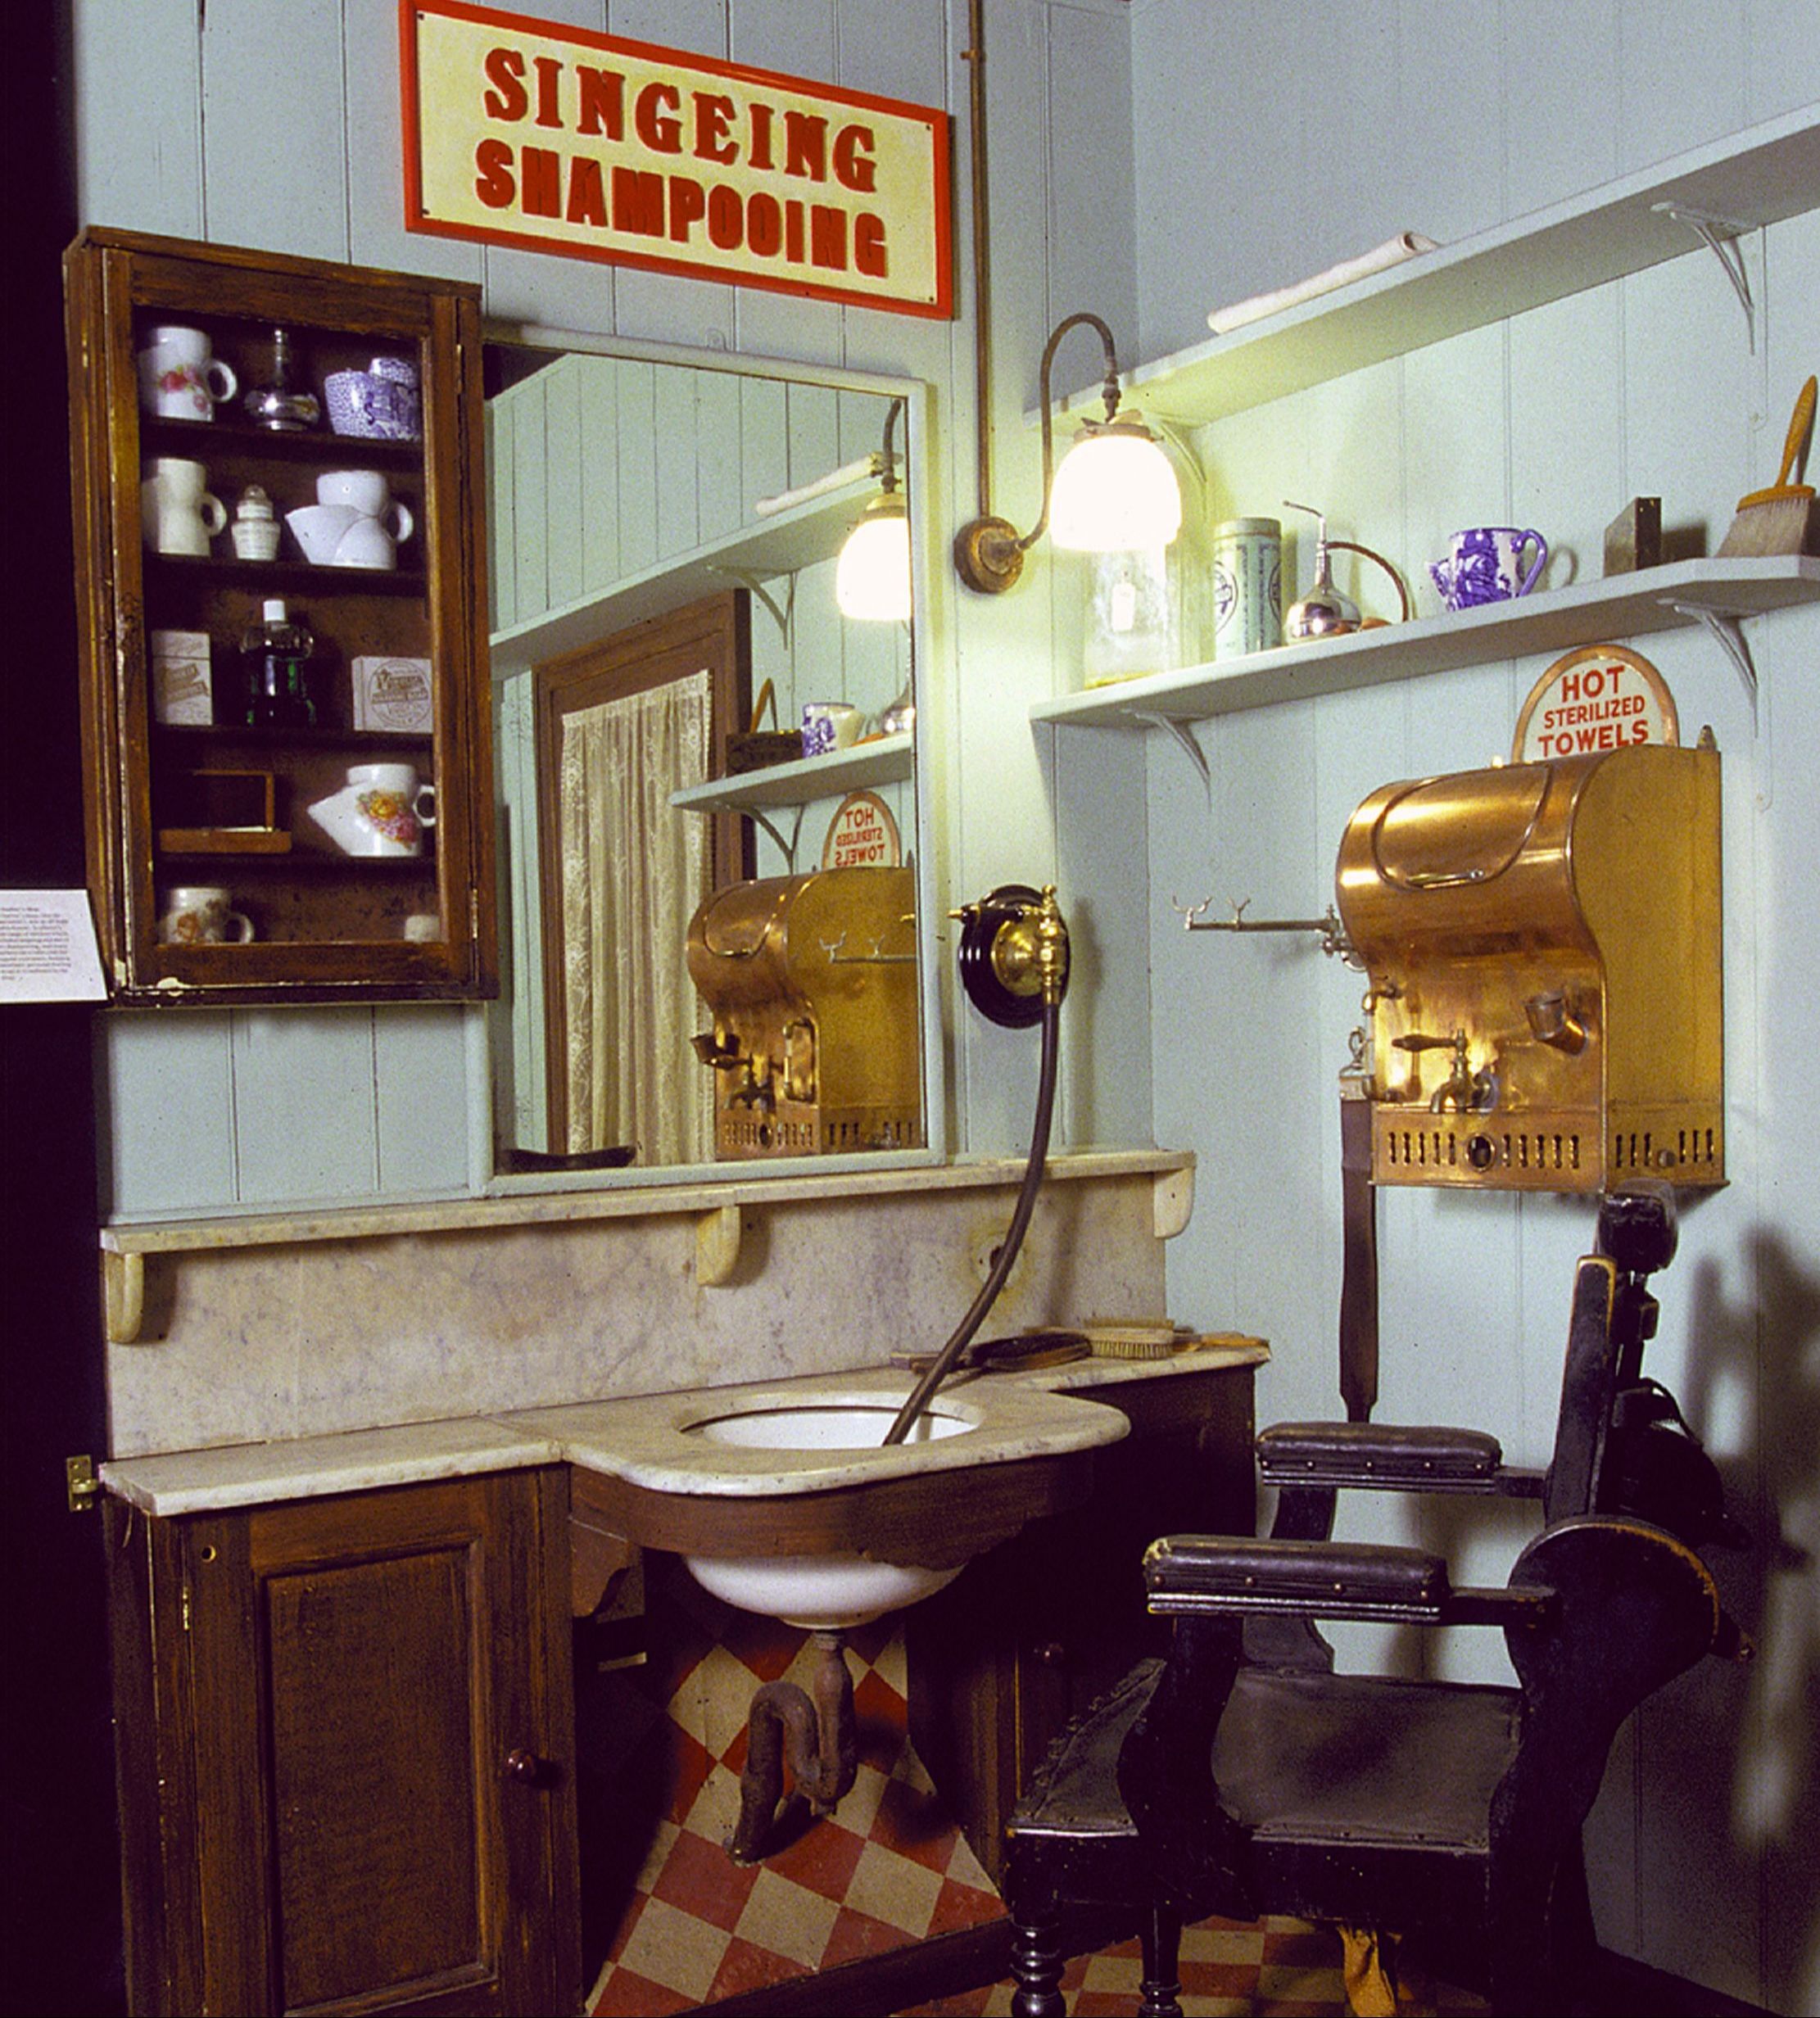 General view of a reconstruction of a Victorian barber shop. A barber services for men included haircuts, shaves and shampooing. Hair was also 'singed'.